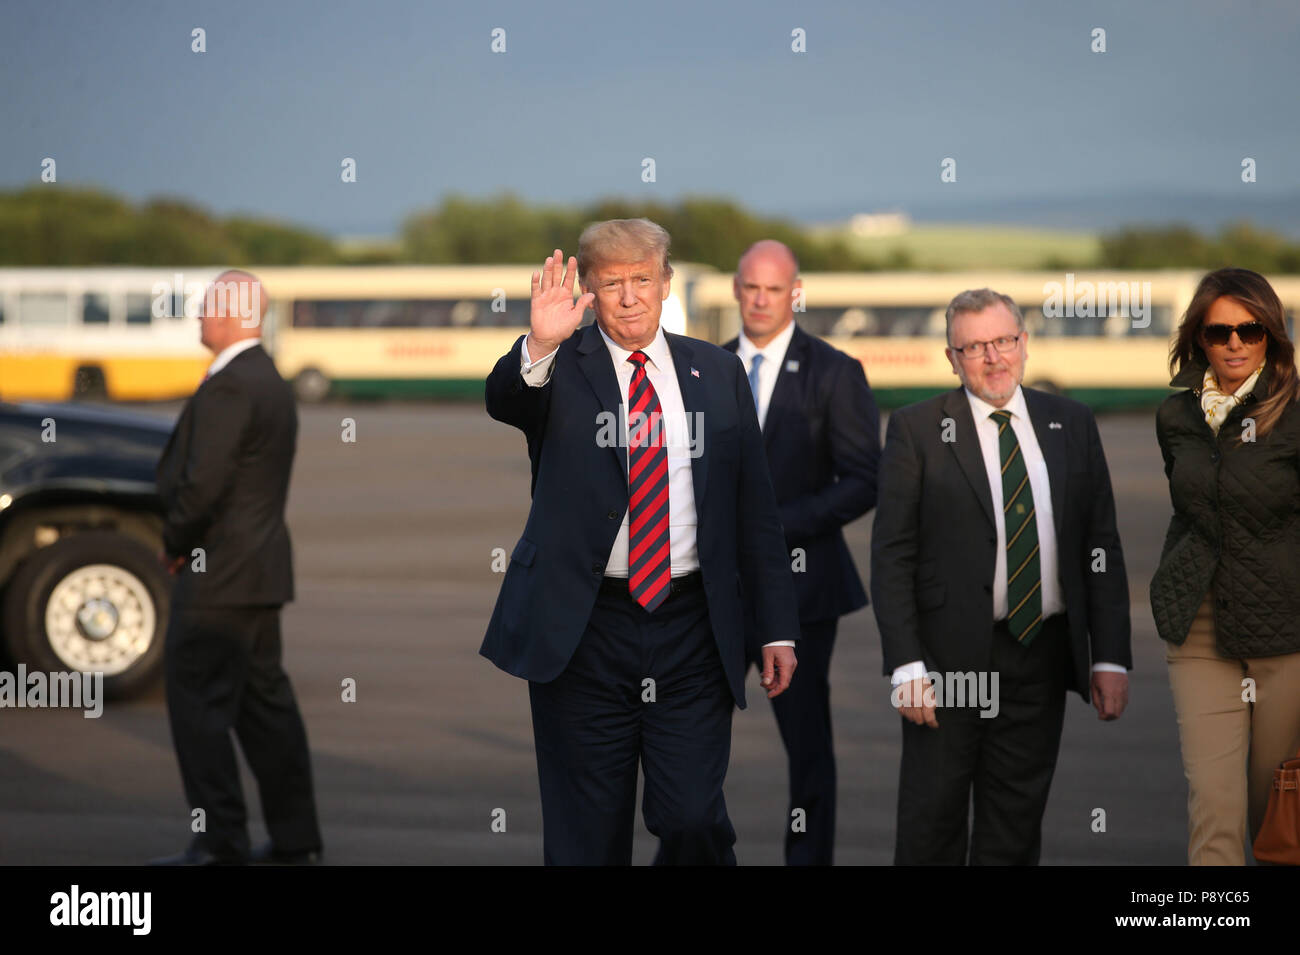 US President Donald Trump and his wife, Melania are welcomed by Scottish Secretary David Mundell (second right), as they arrive on Air Force One at Prestwick airport in Ayrshire, en route for Turnberry, where they are expected to stay over the weekend. Stock Photo